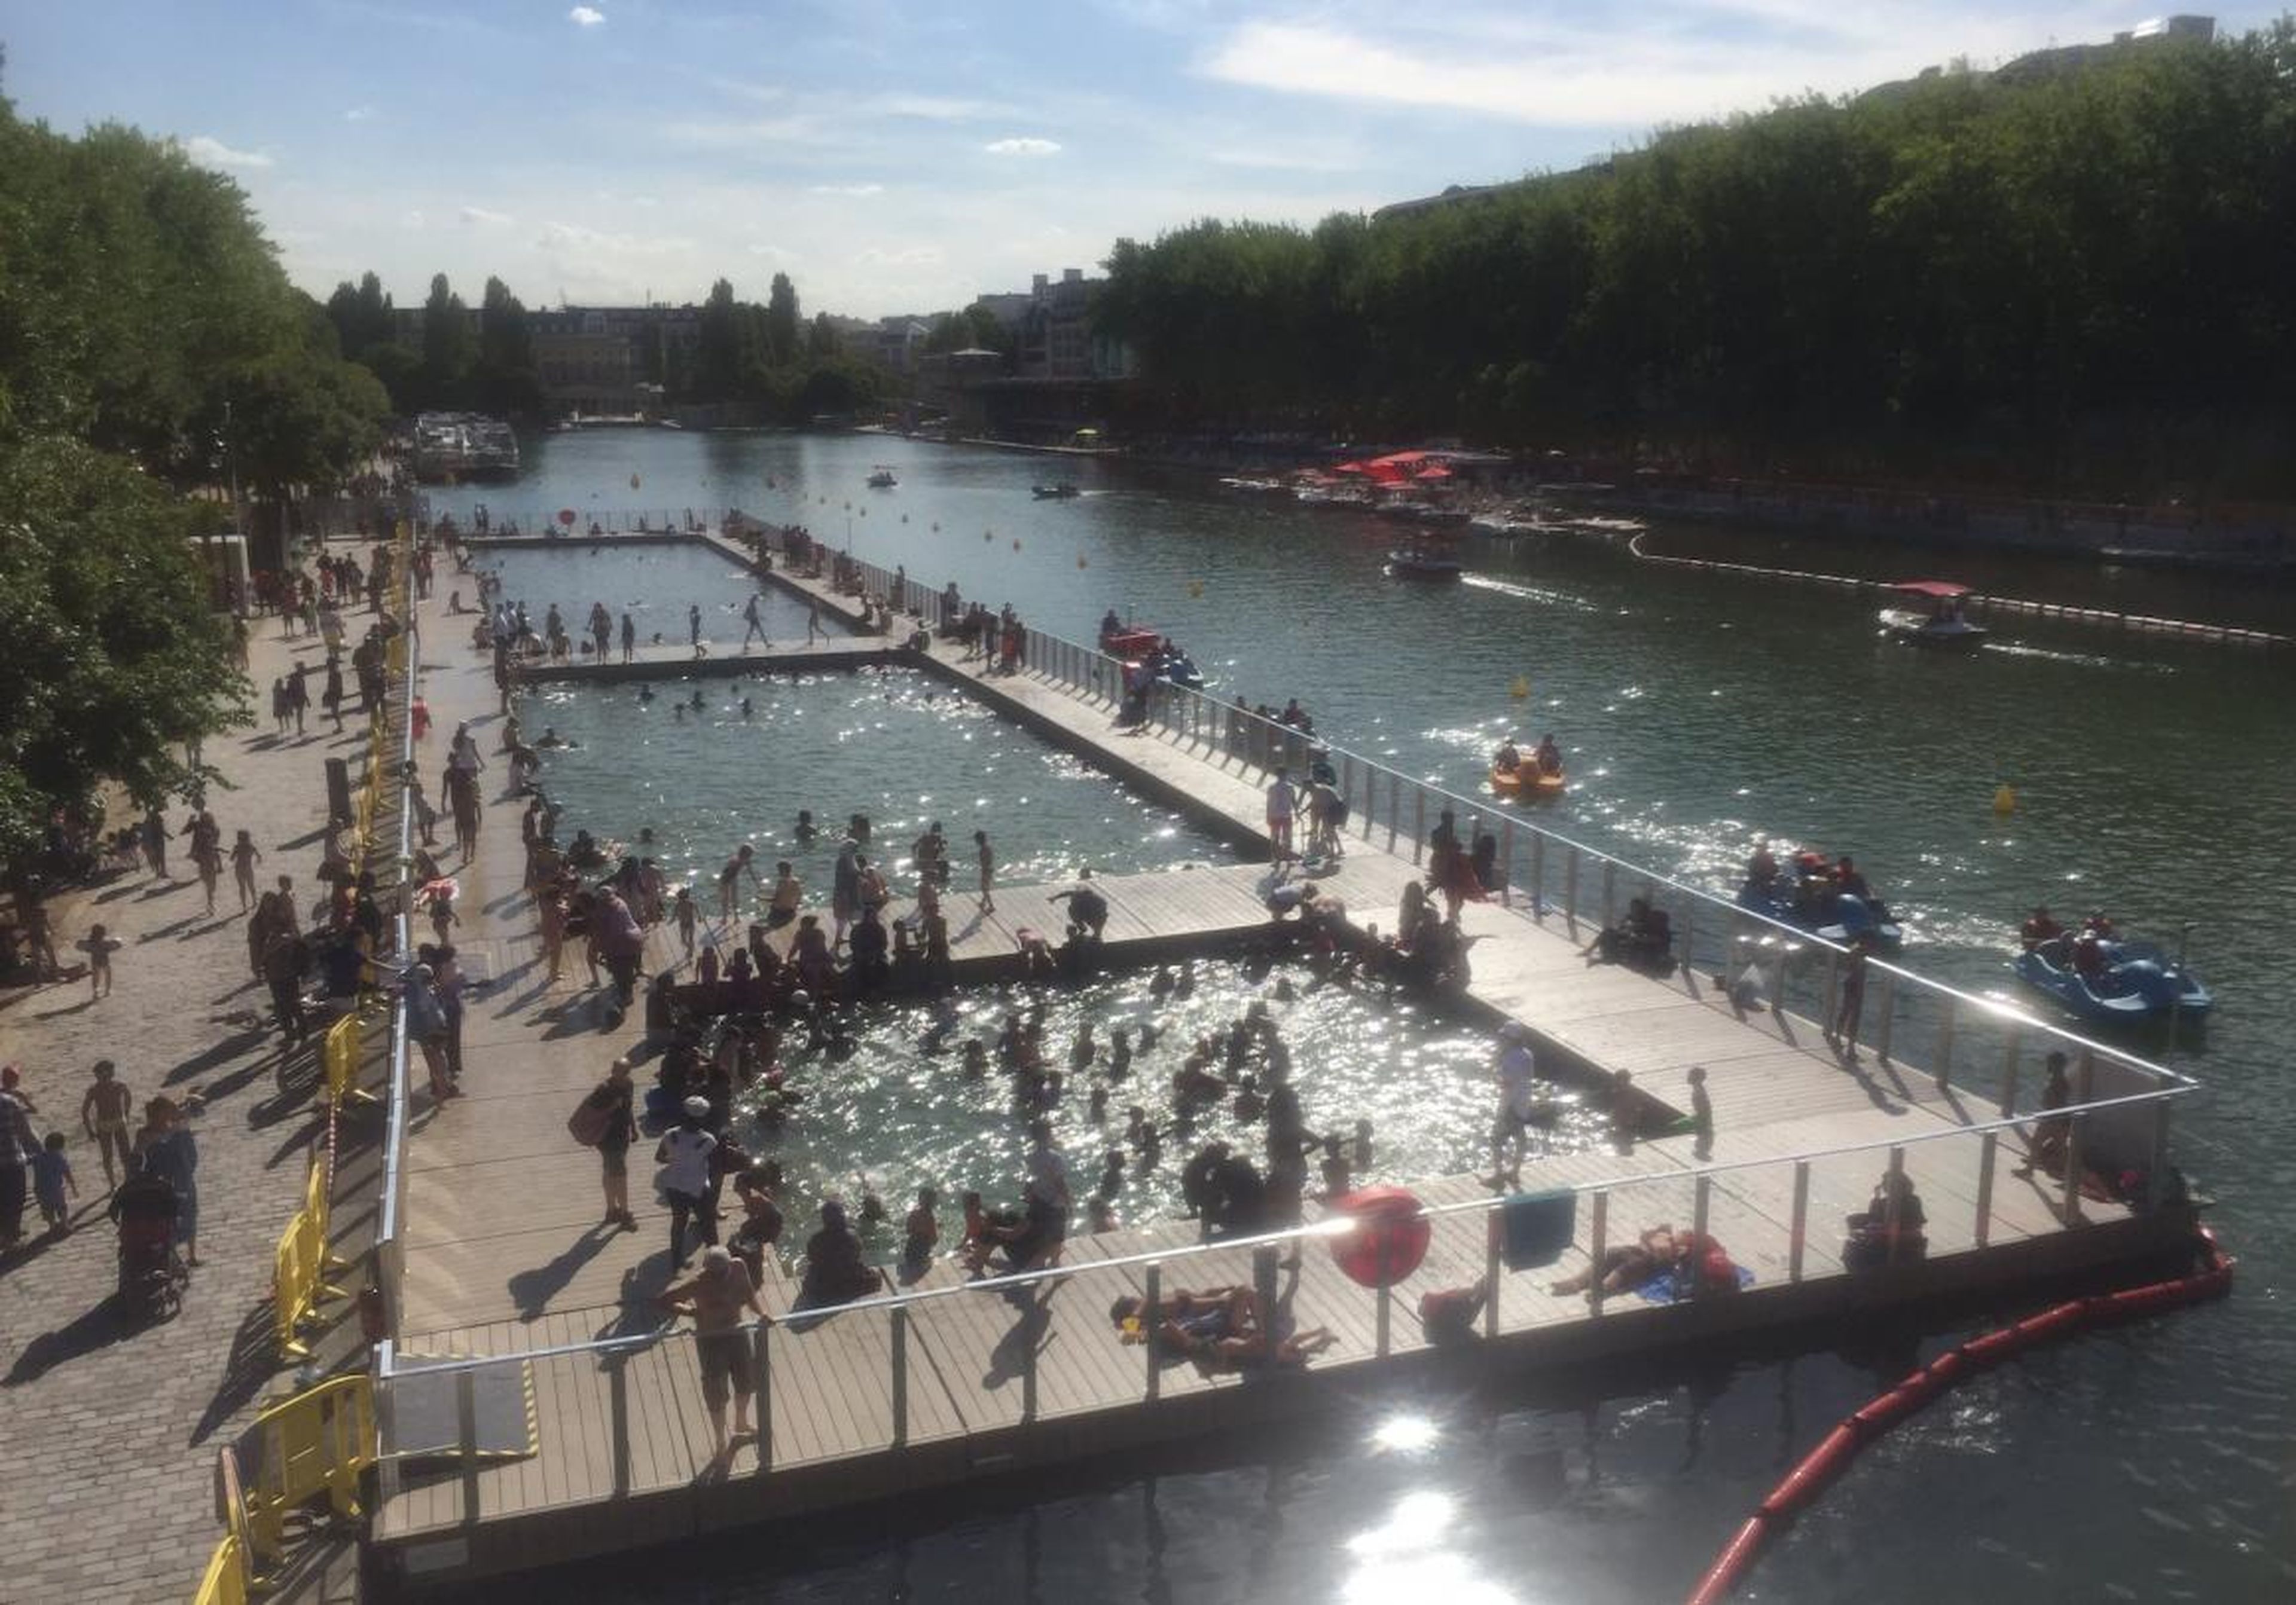 People swim in the outdoor pool at Paris' La Villette canal in July 2017.